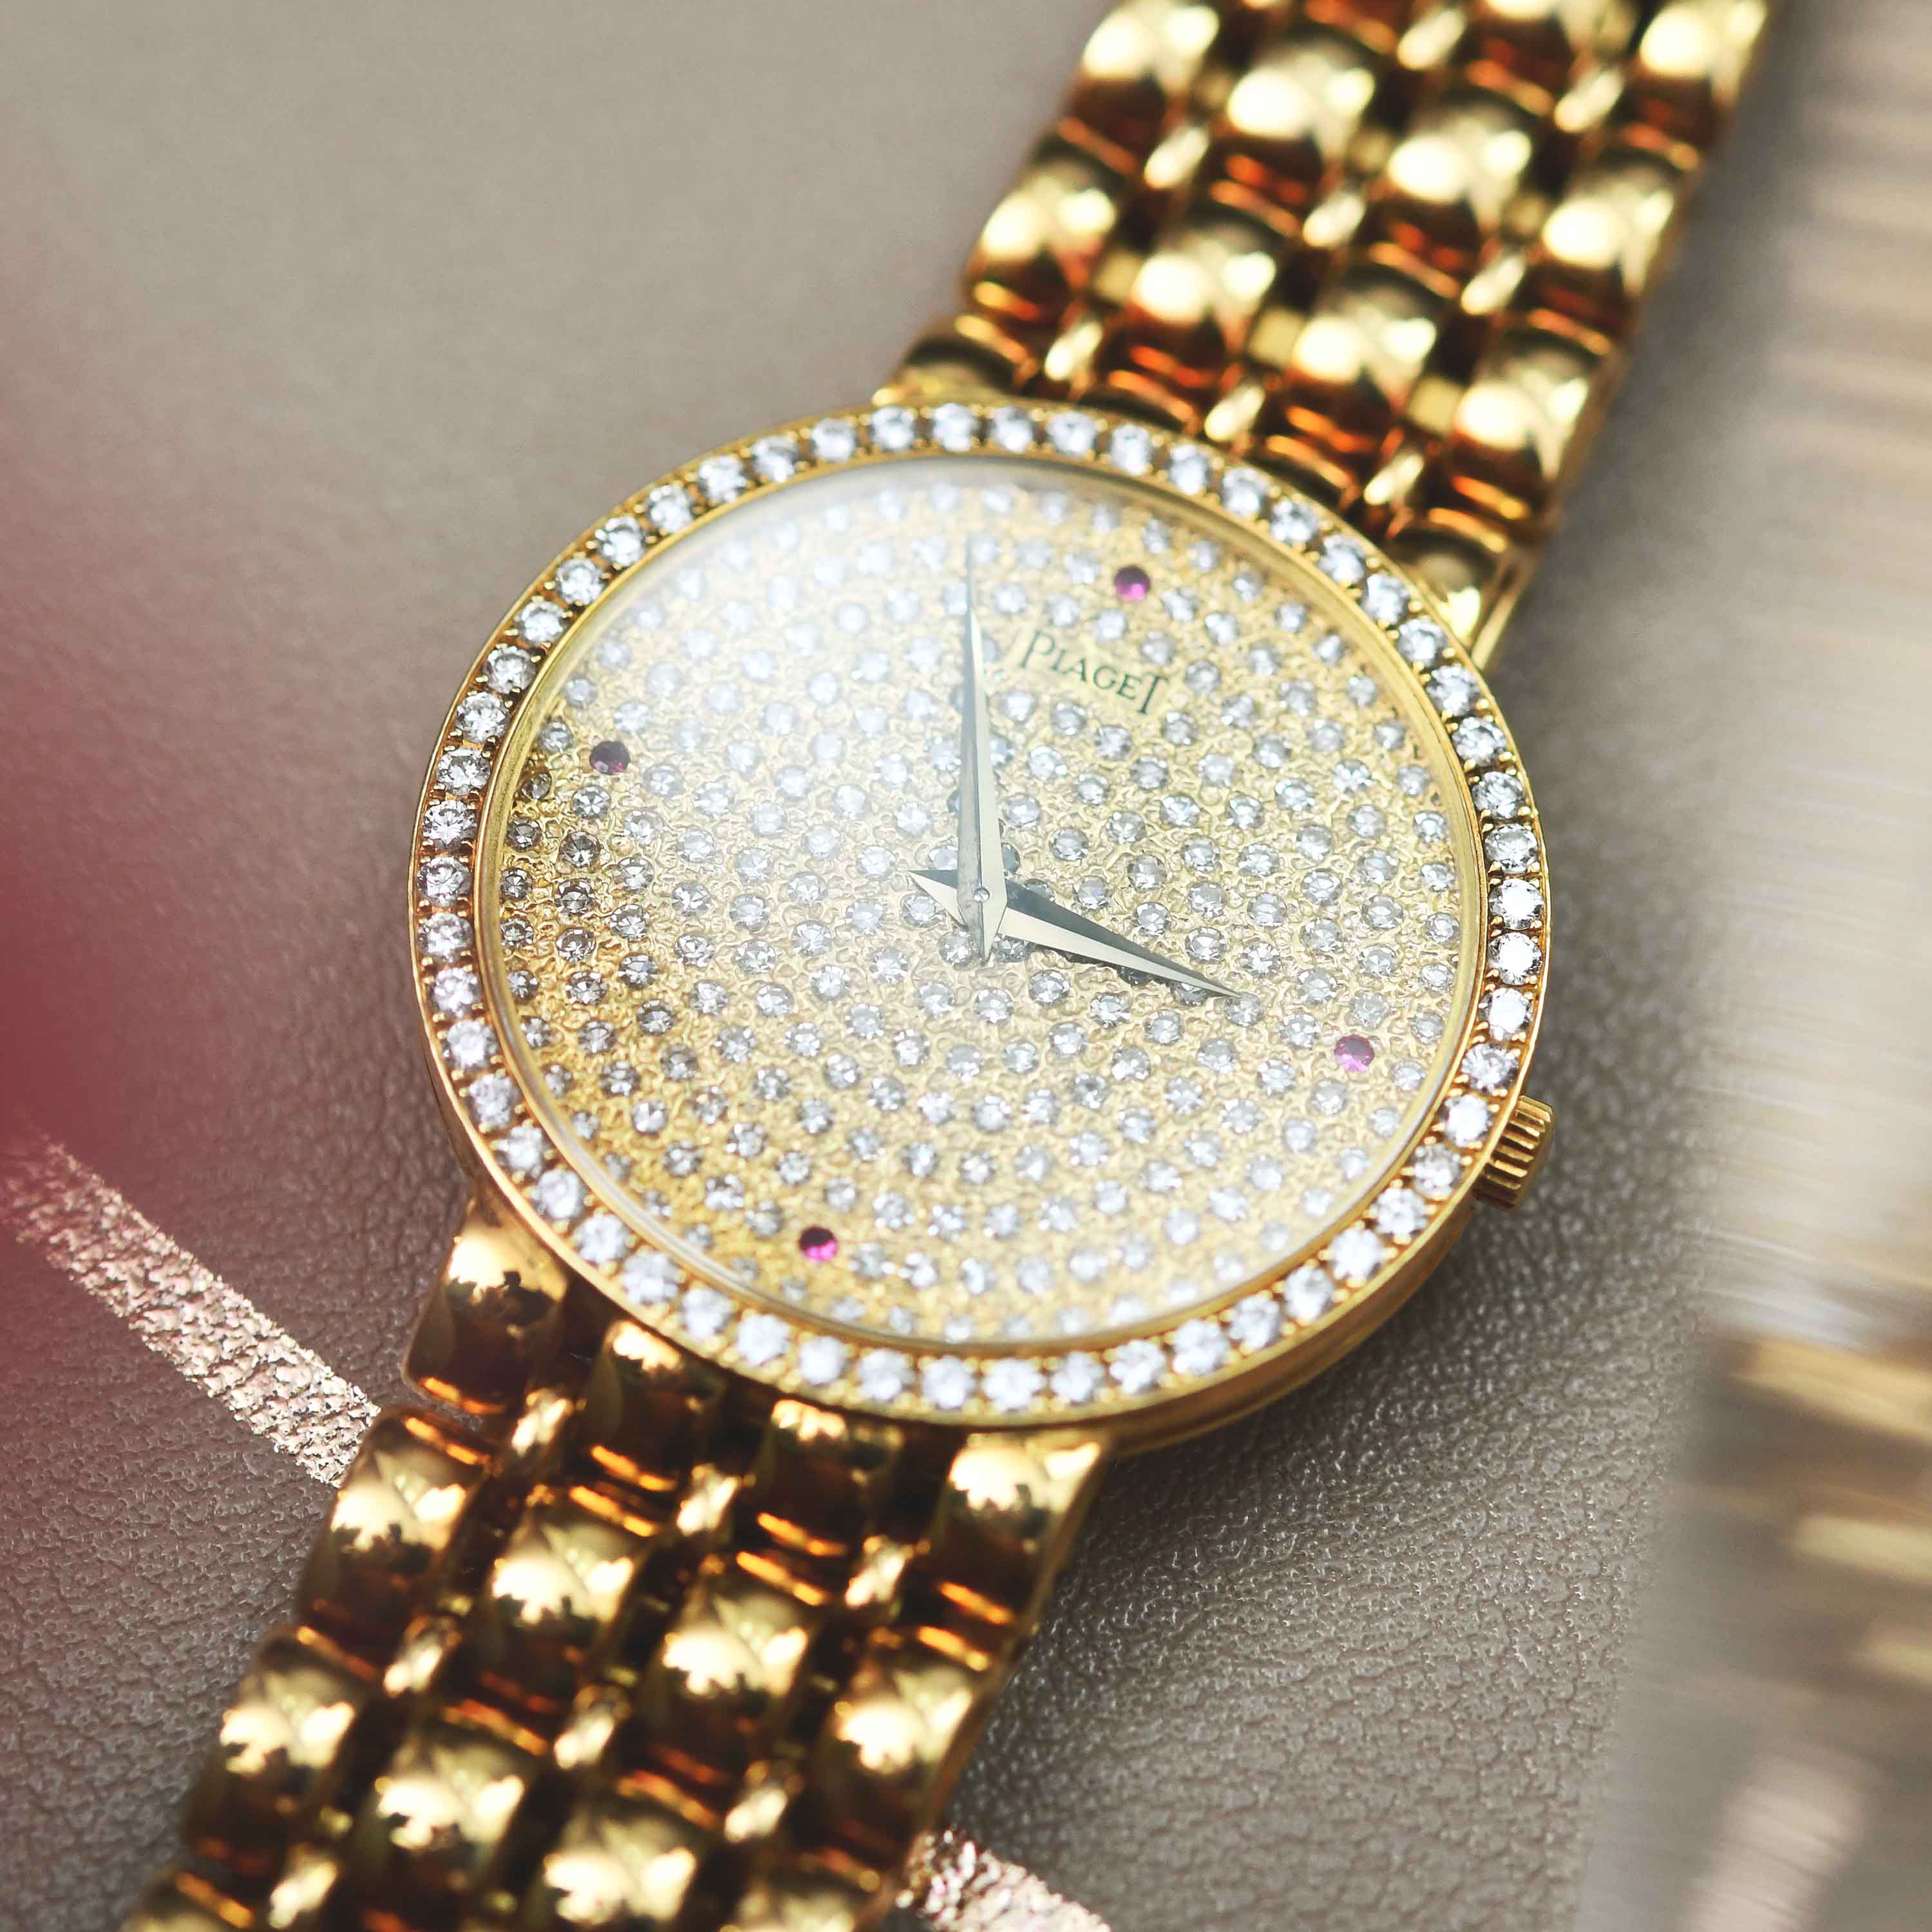 piaget-ref84075-pave-diamond-dial-ruby-indexes-yg-bracelet-img-main4